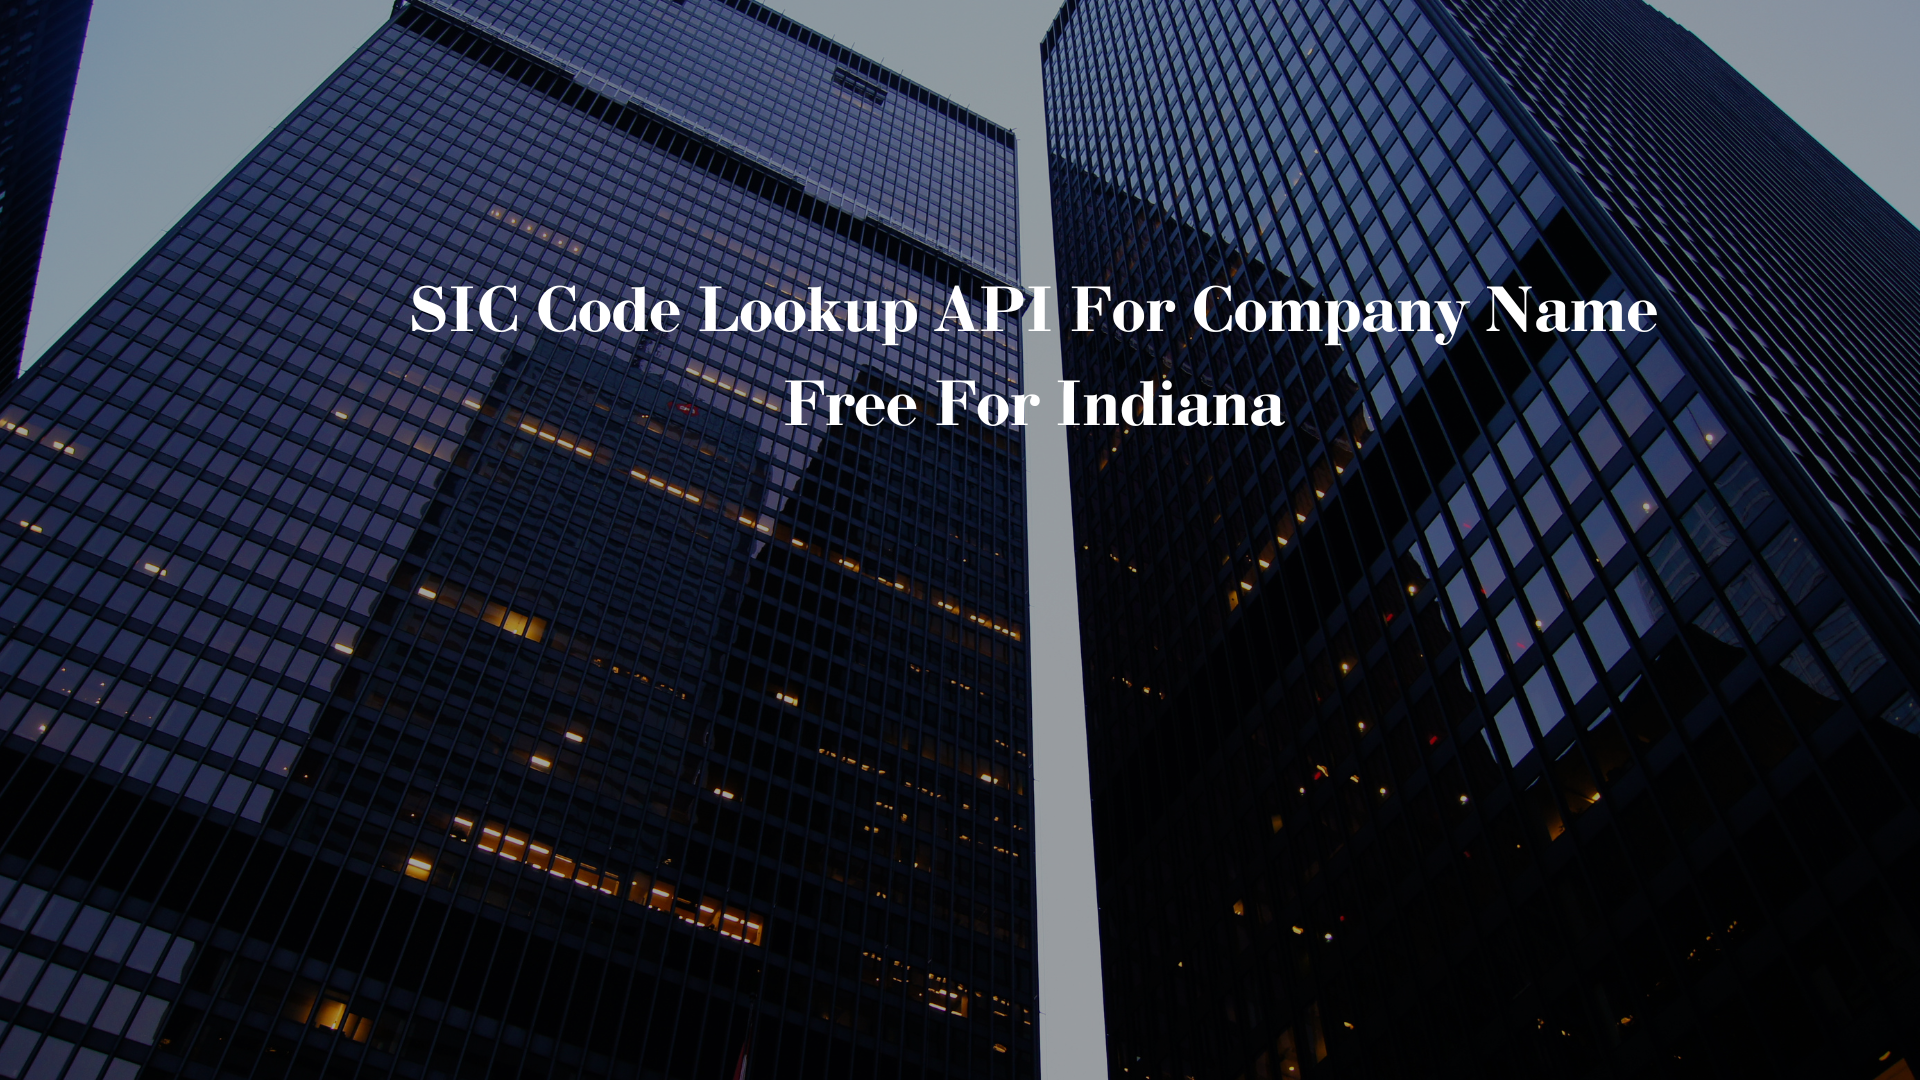 SIC Code Lookup API For Company Name Free For Indiana